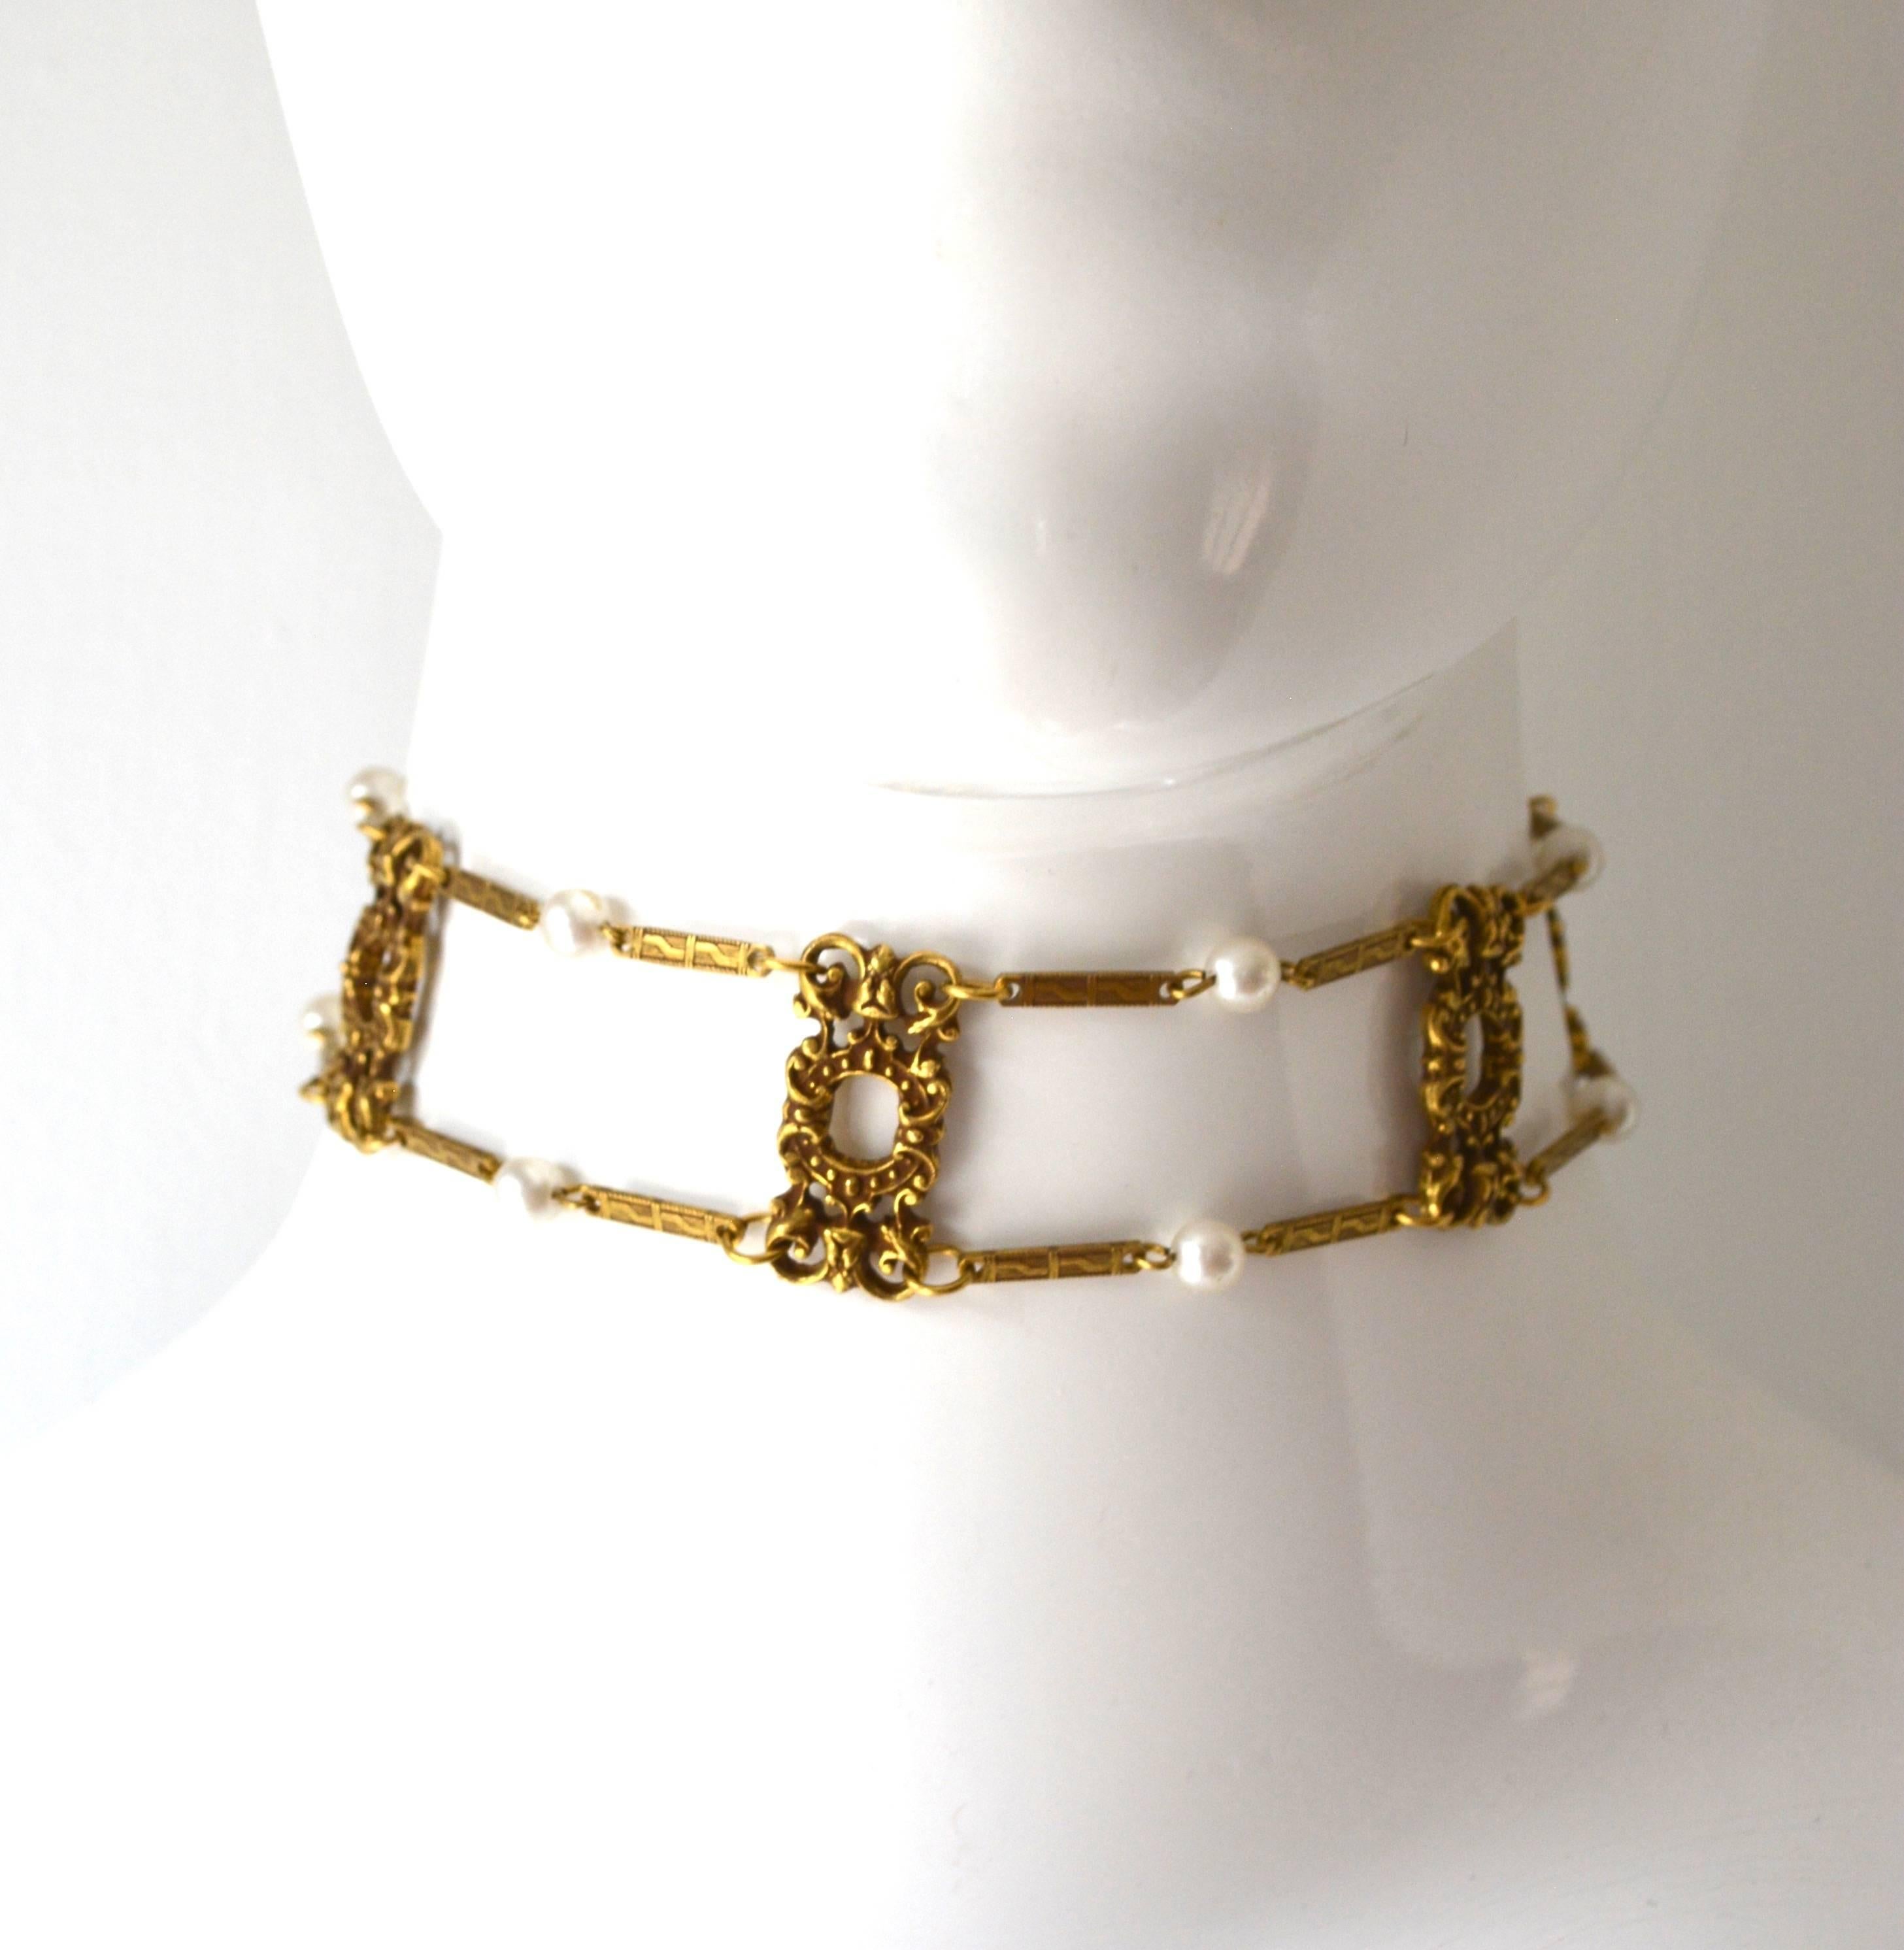 1960s Victorian Revival Collar In Excellent Condition For Sale In Litchfield County, CT